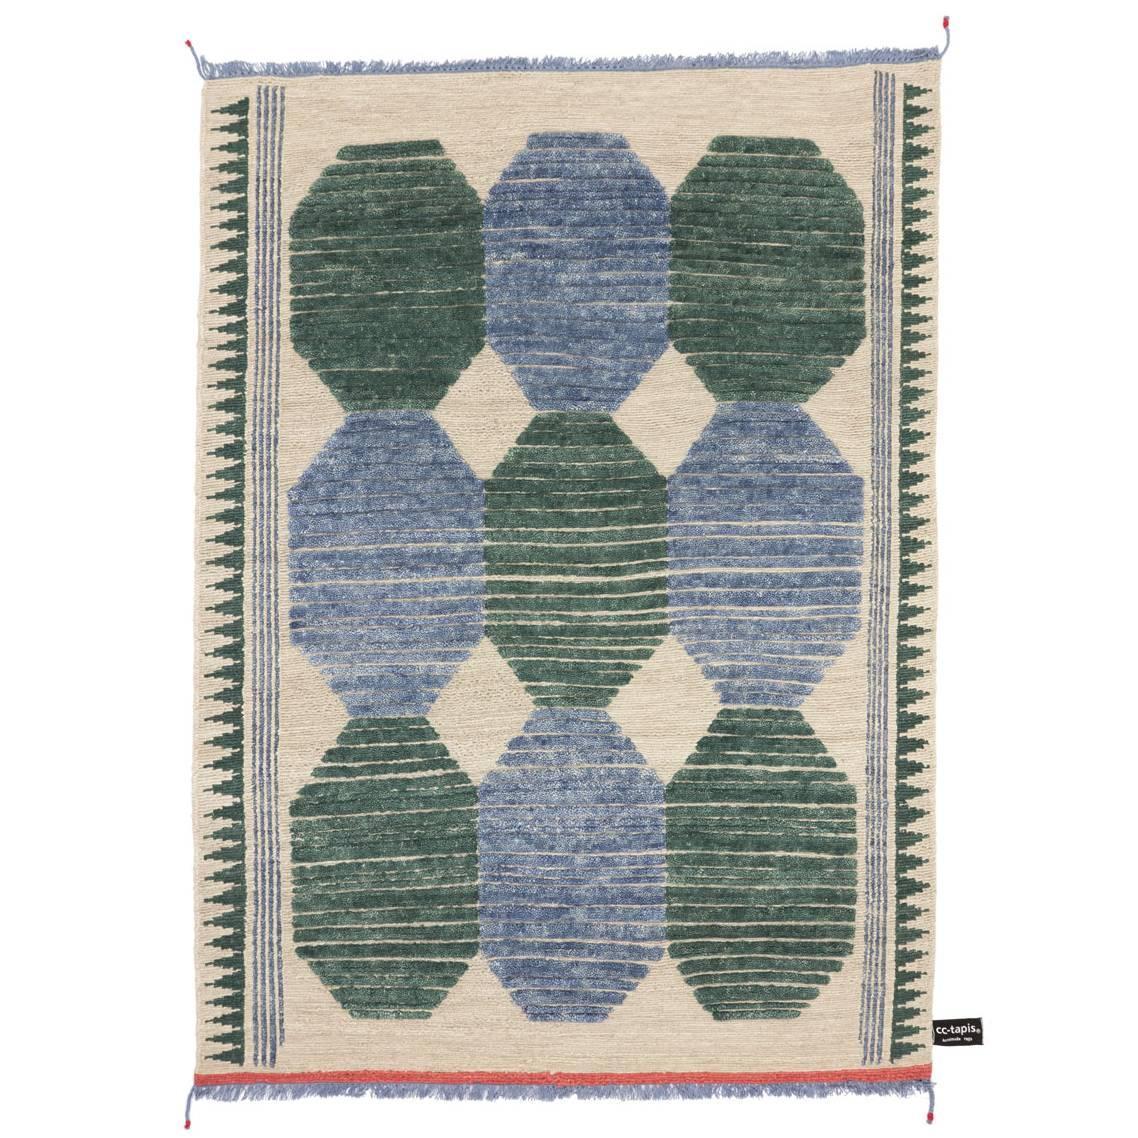 Primitive Weave C Blue/Green #1182 rug Designed by Chiara Andreatti for cc-tapis For Sale